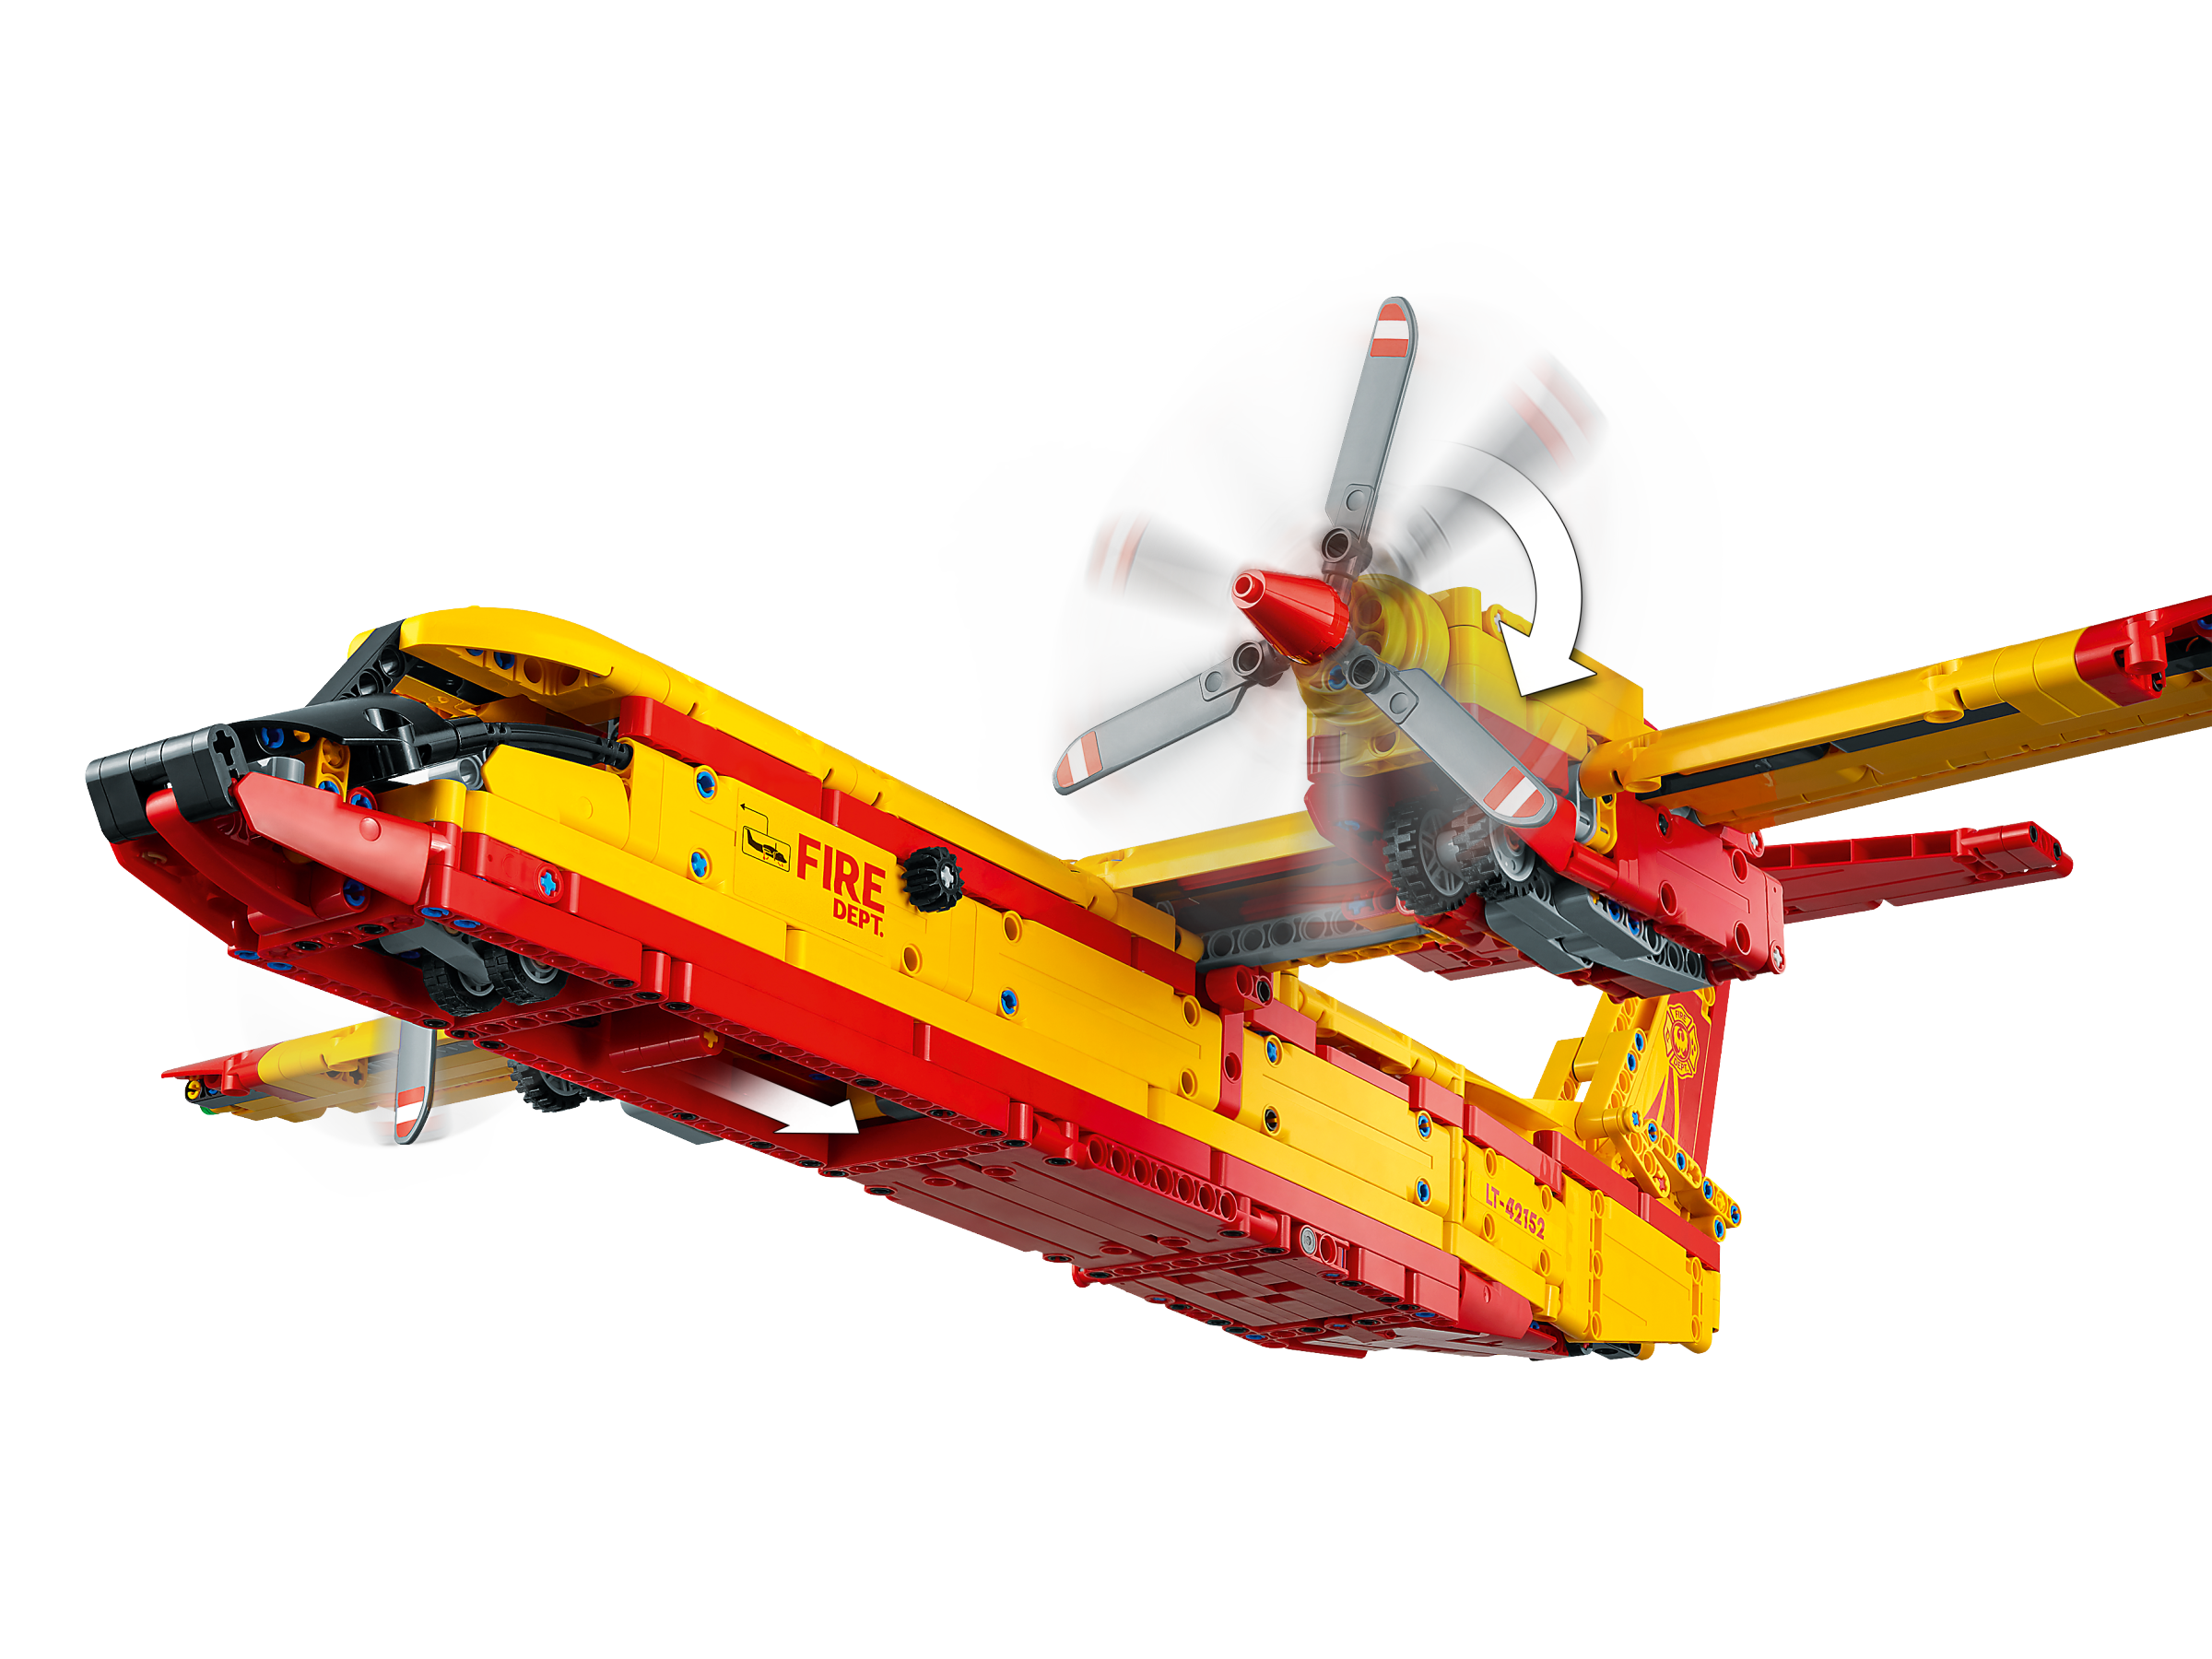 Firefighter Aircraft 42152 | Technic™ | Buy online at the Official 